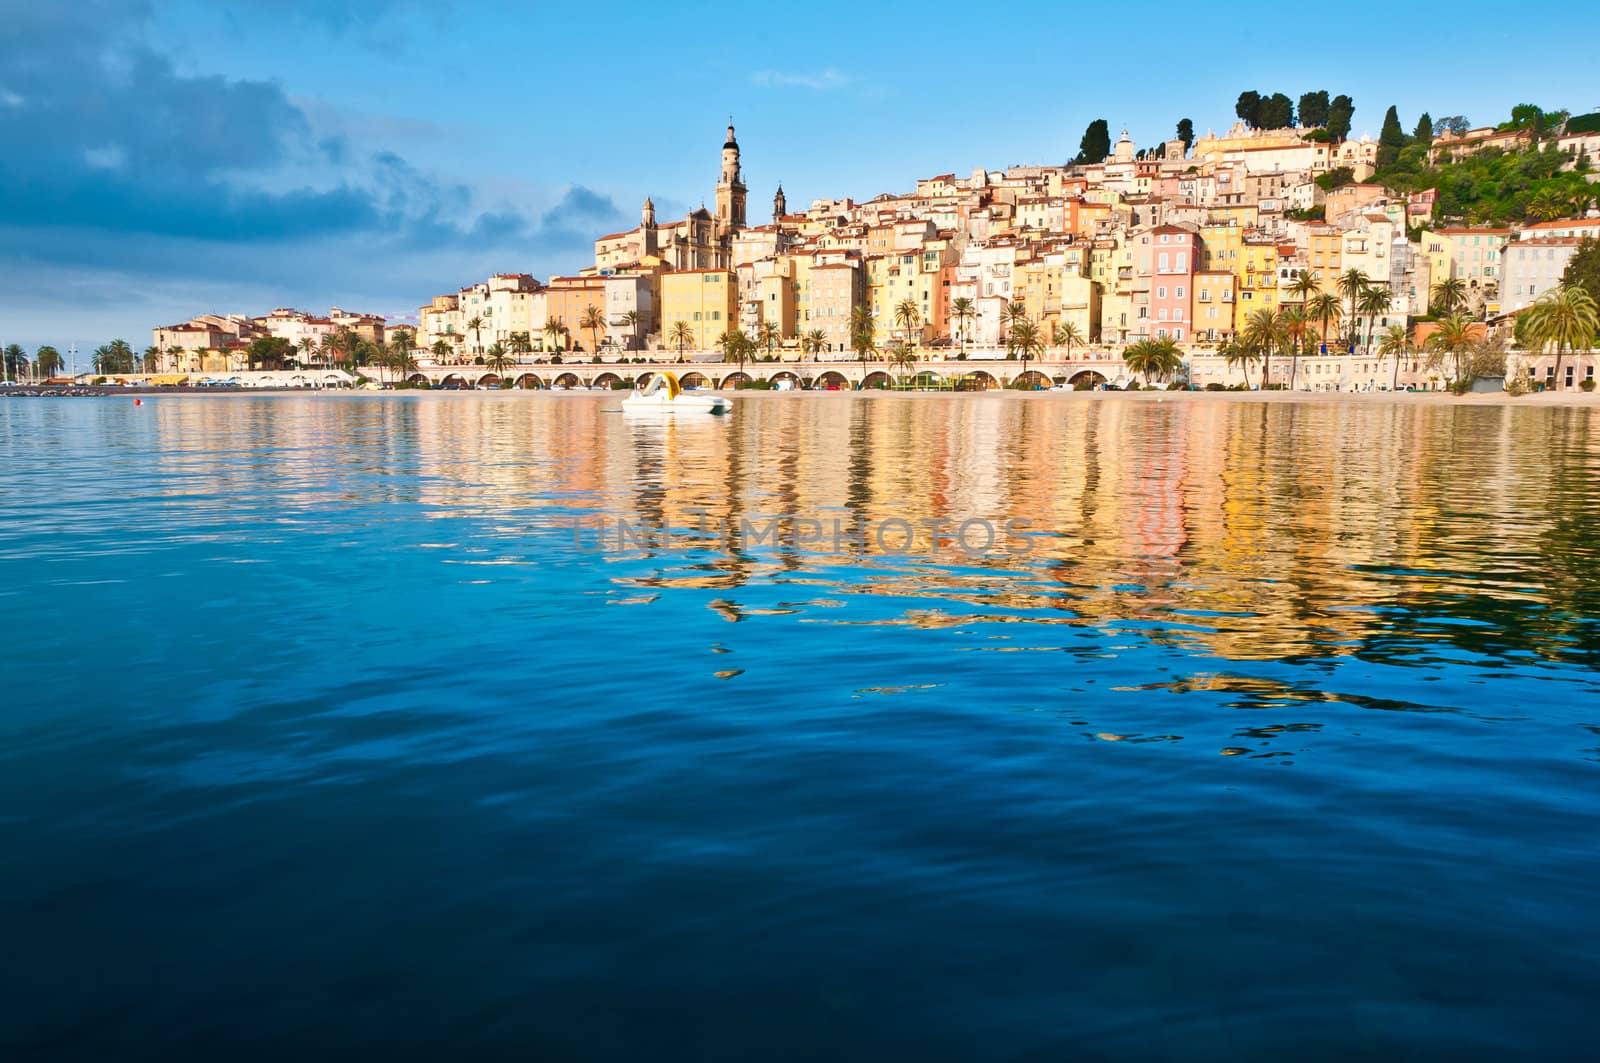 Menton Provence village houses sunrise with water reflections, Menton, France